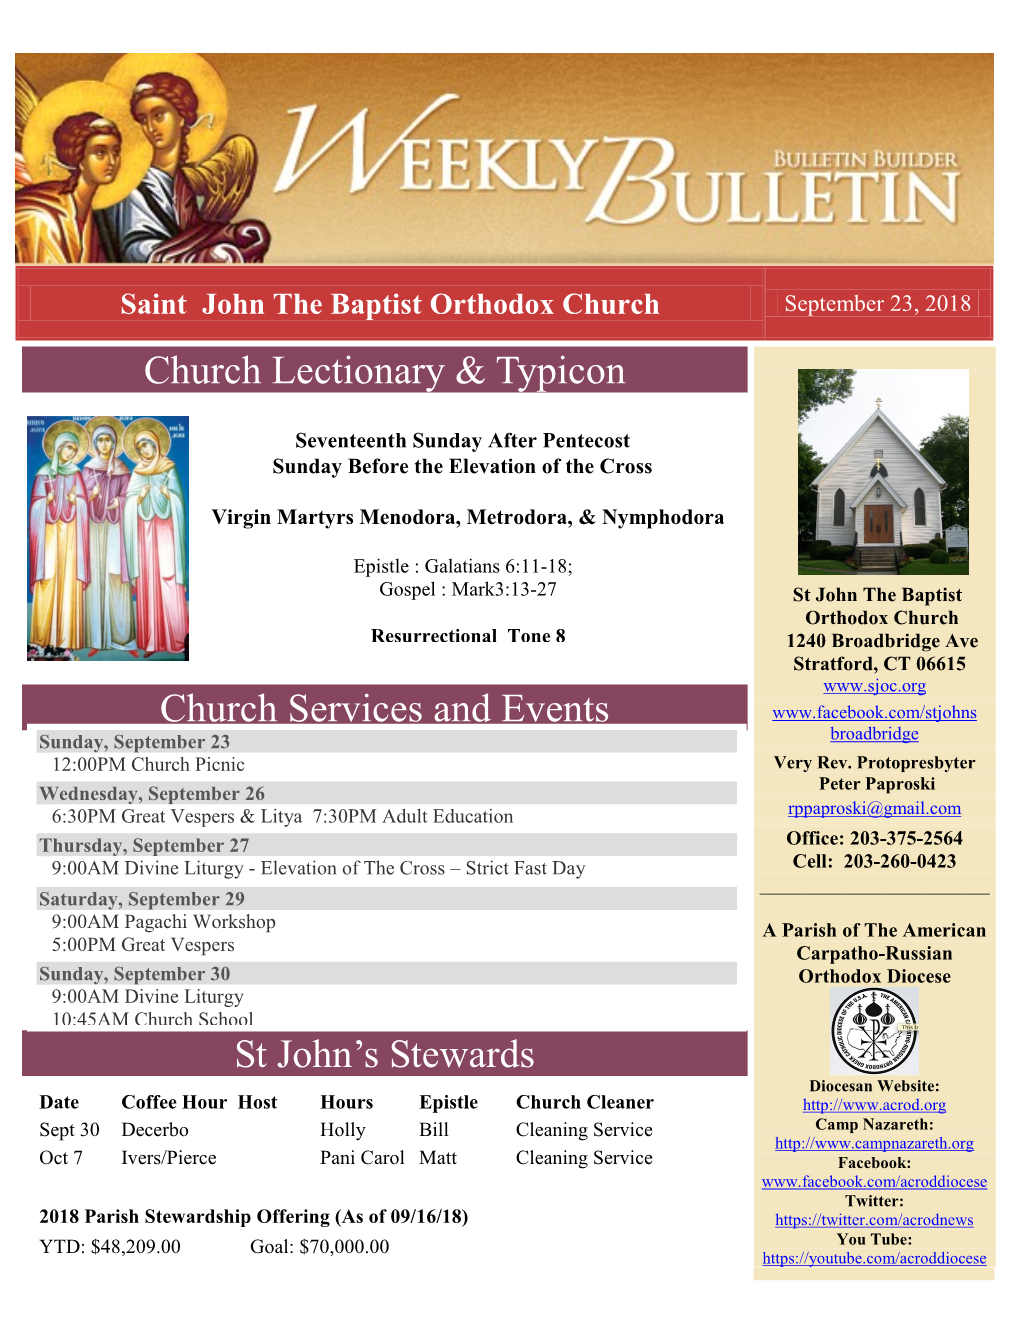 Church Lectionary & Typicon Church Services and Events St John's